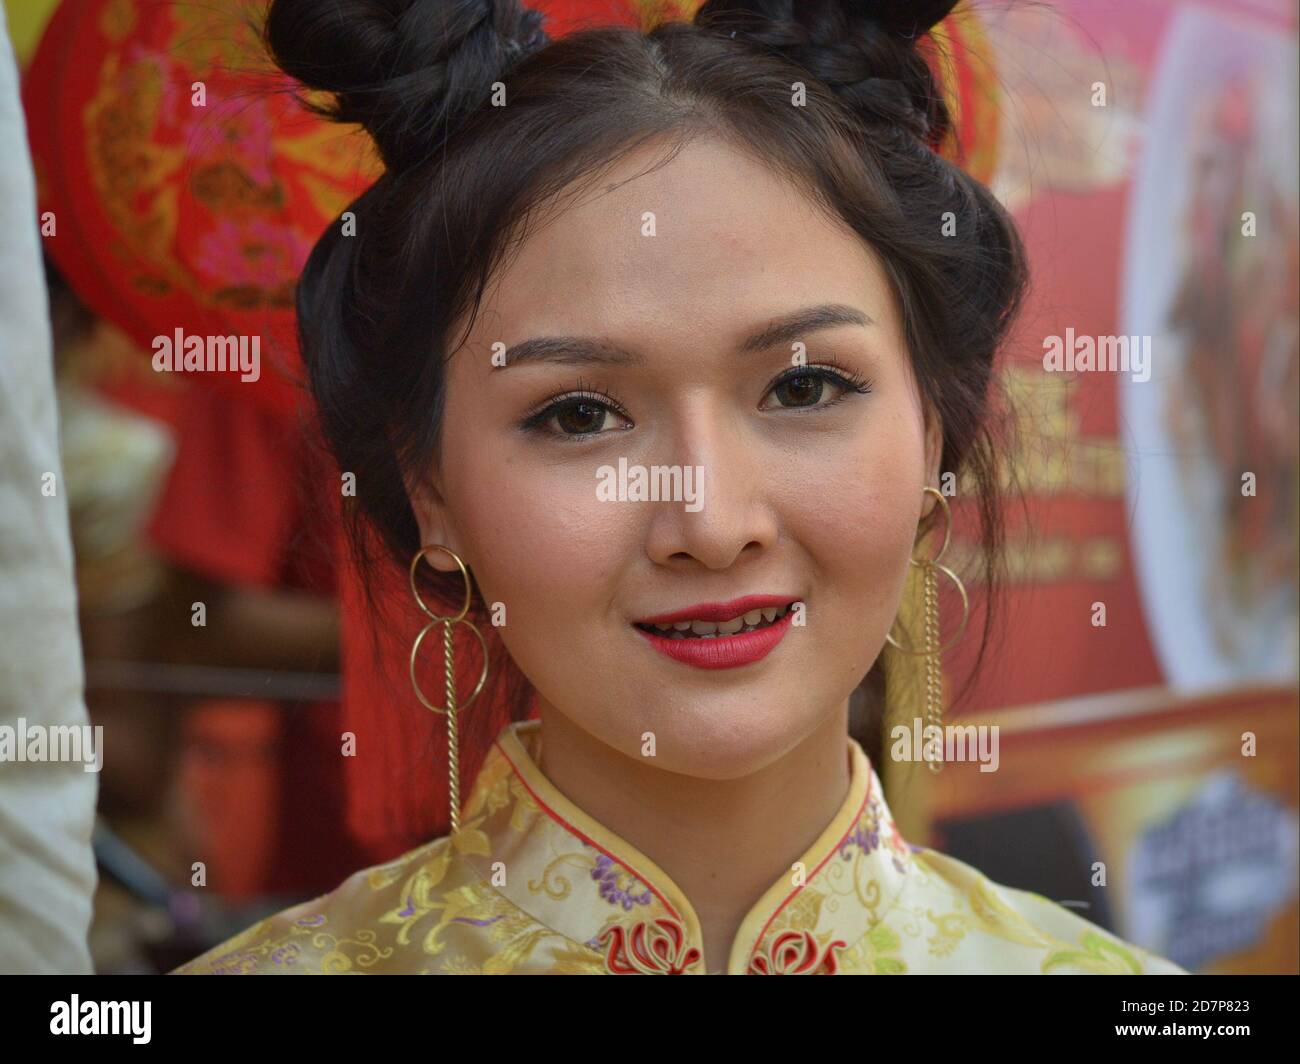 Young Thai Chinese beauty with trendy contact lenses and traditional double side buns wears a classic Chinese silk dress and smiles for the camera. Stock Photo